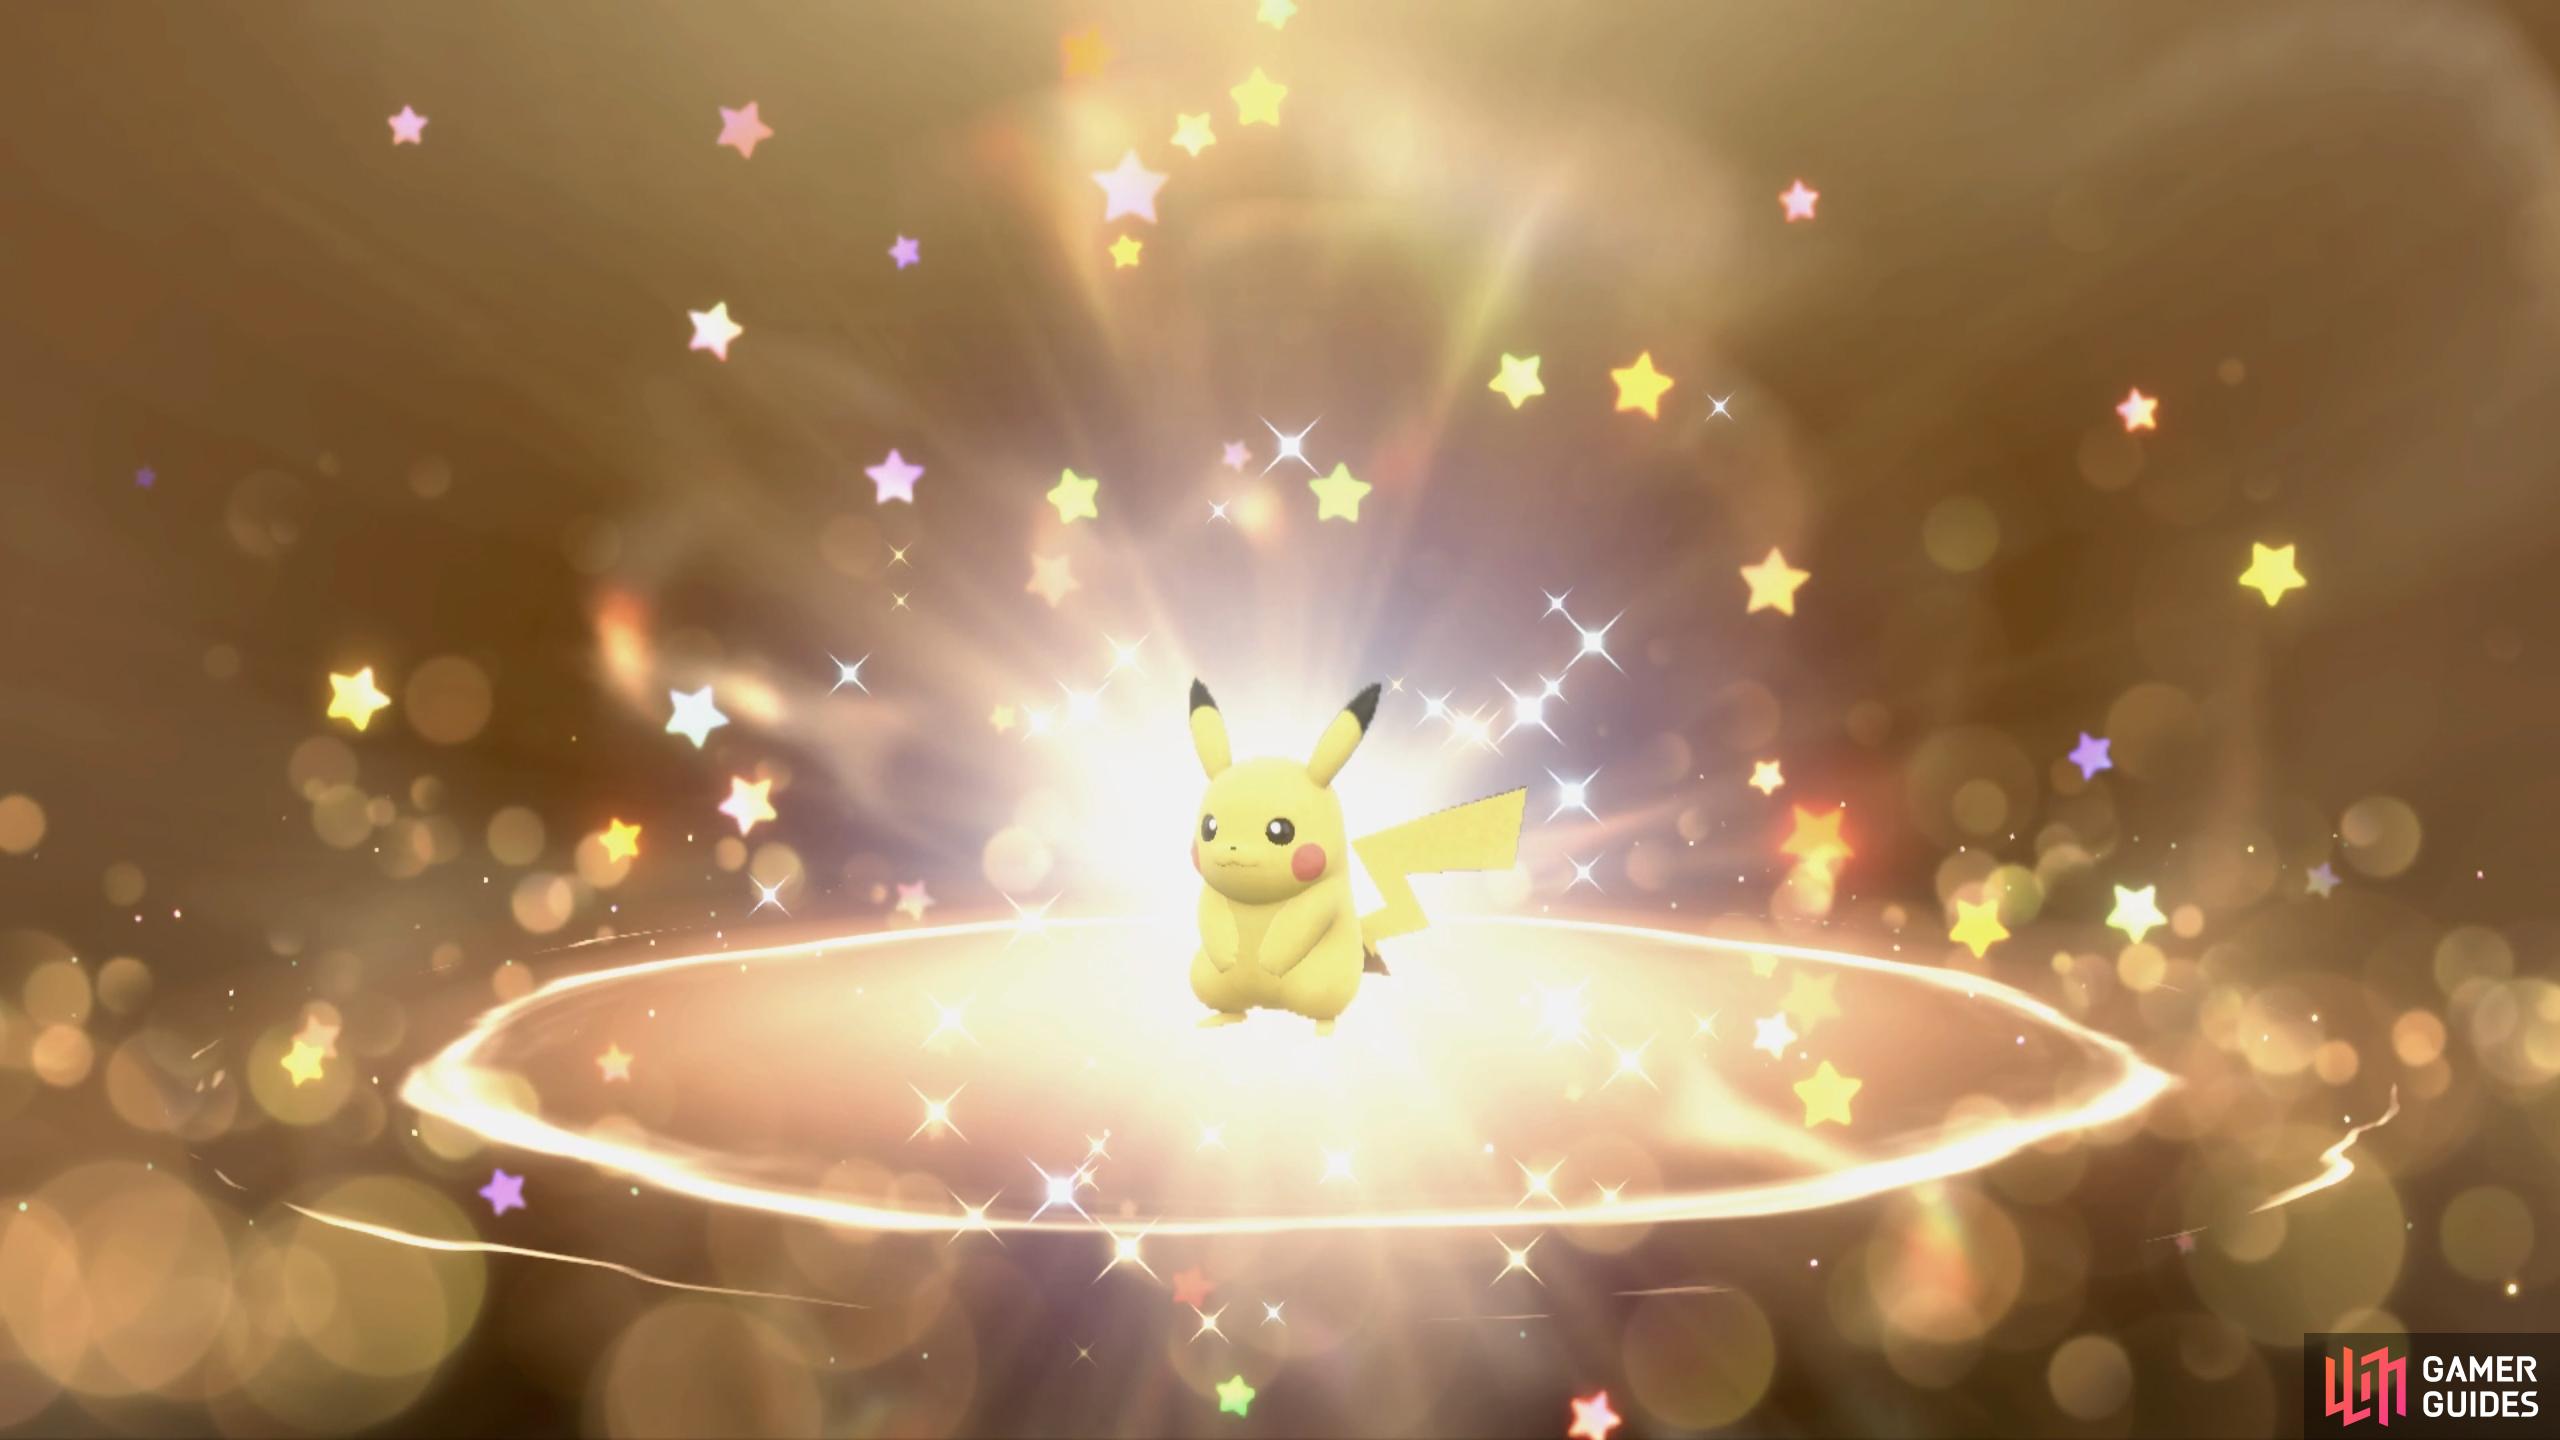 The Flying Tera Type Pikachu Mystery Gift early purchase bonus.